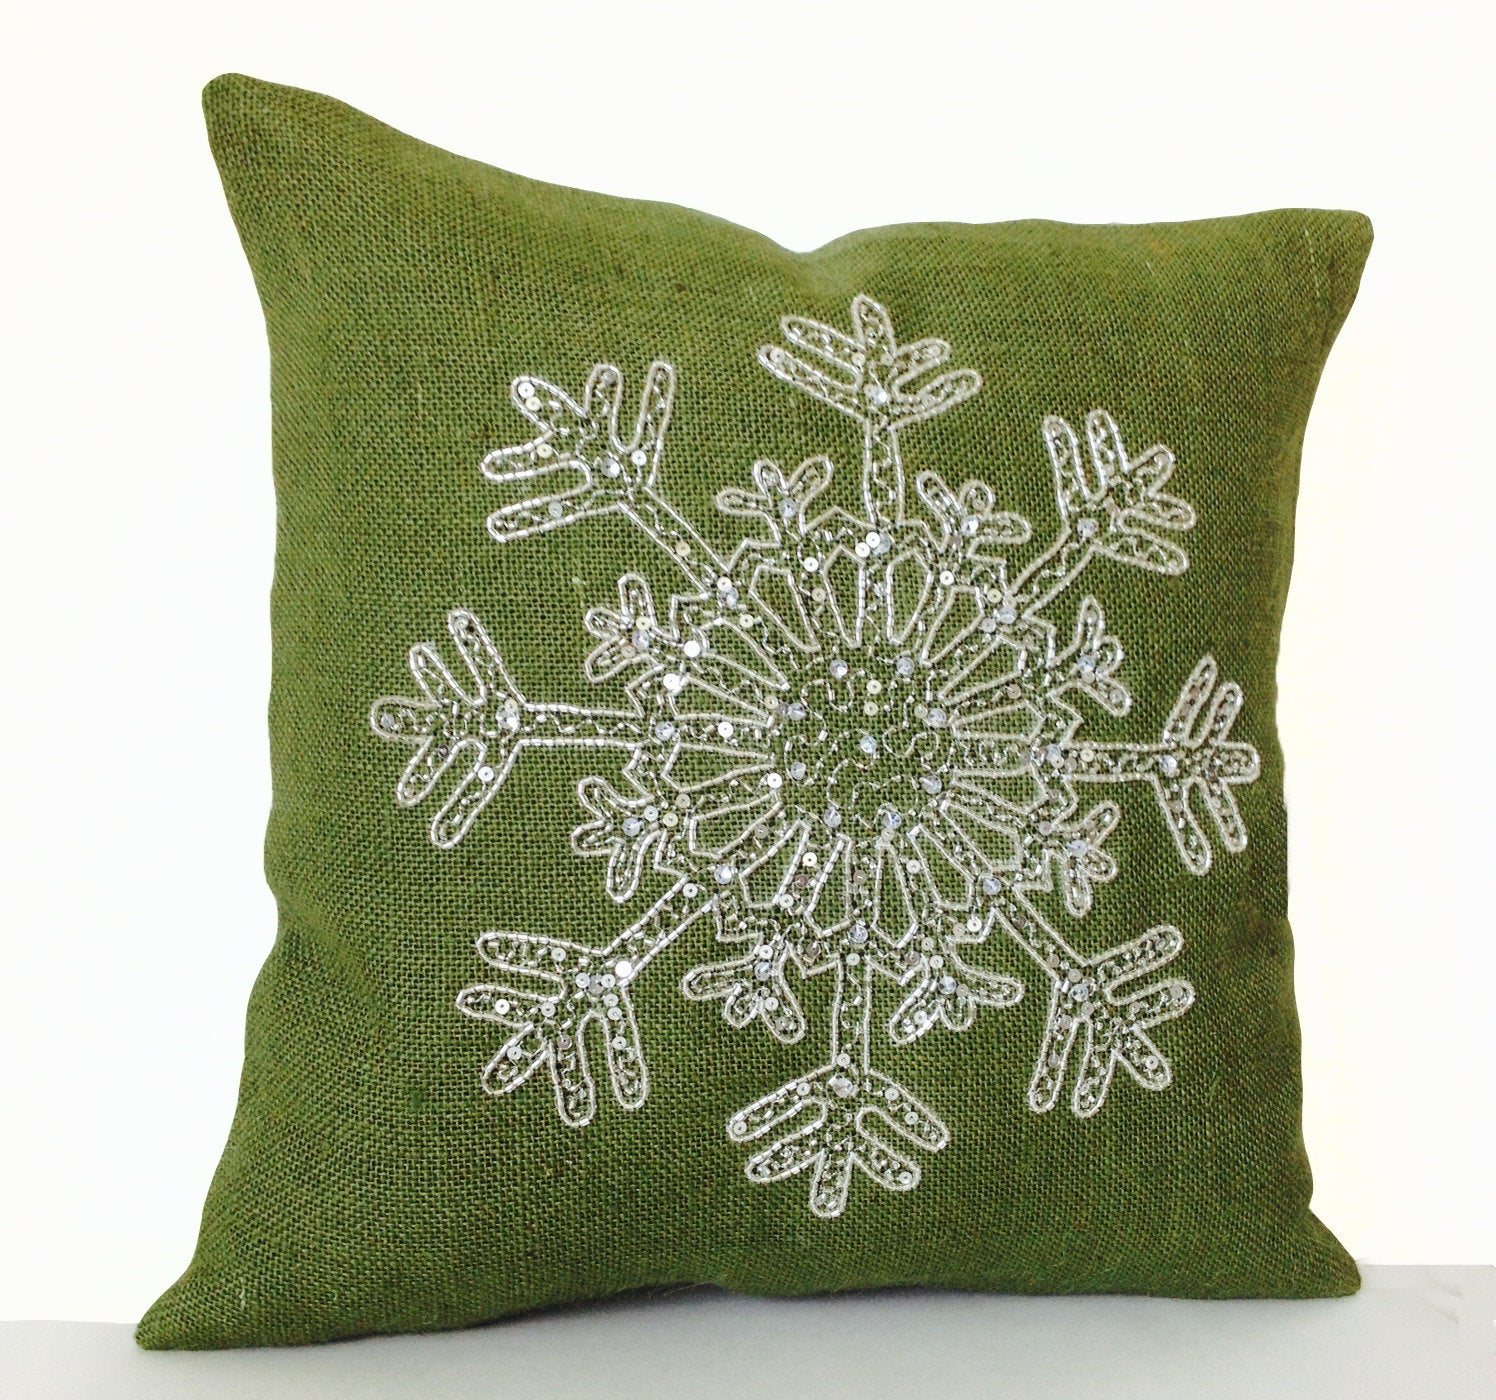 Amore Beaute Christmas pillow covers holiday décor with snowflake in silver sequins embellished on green burlap.